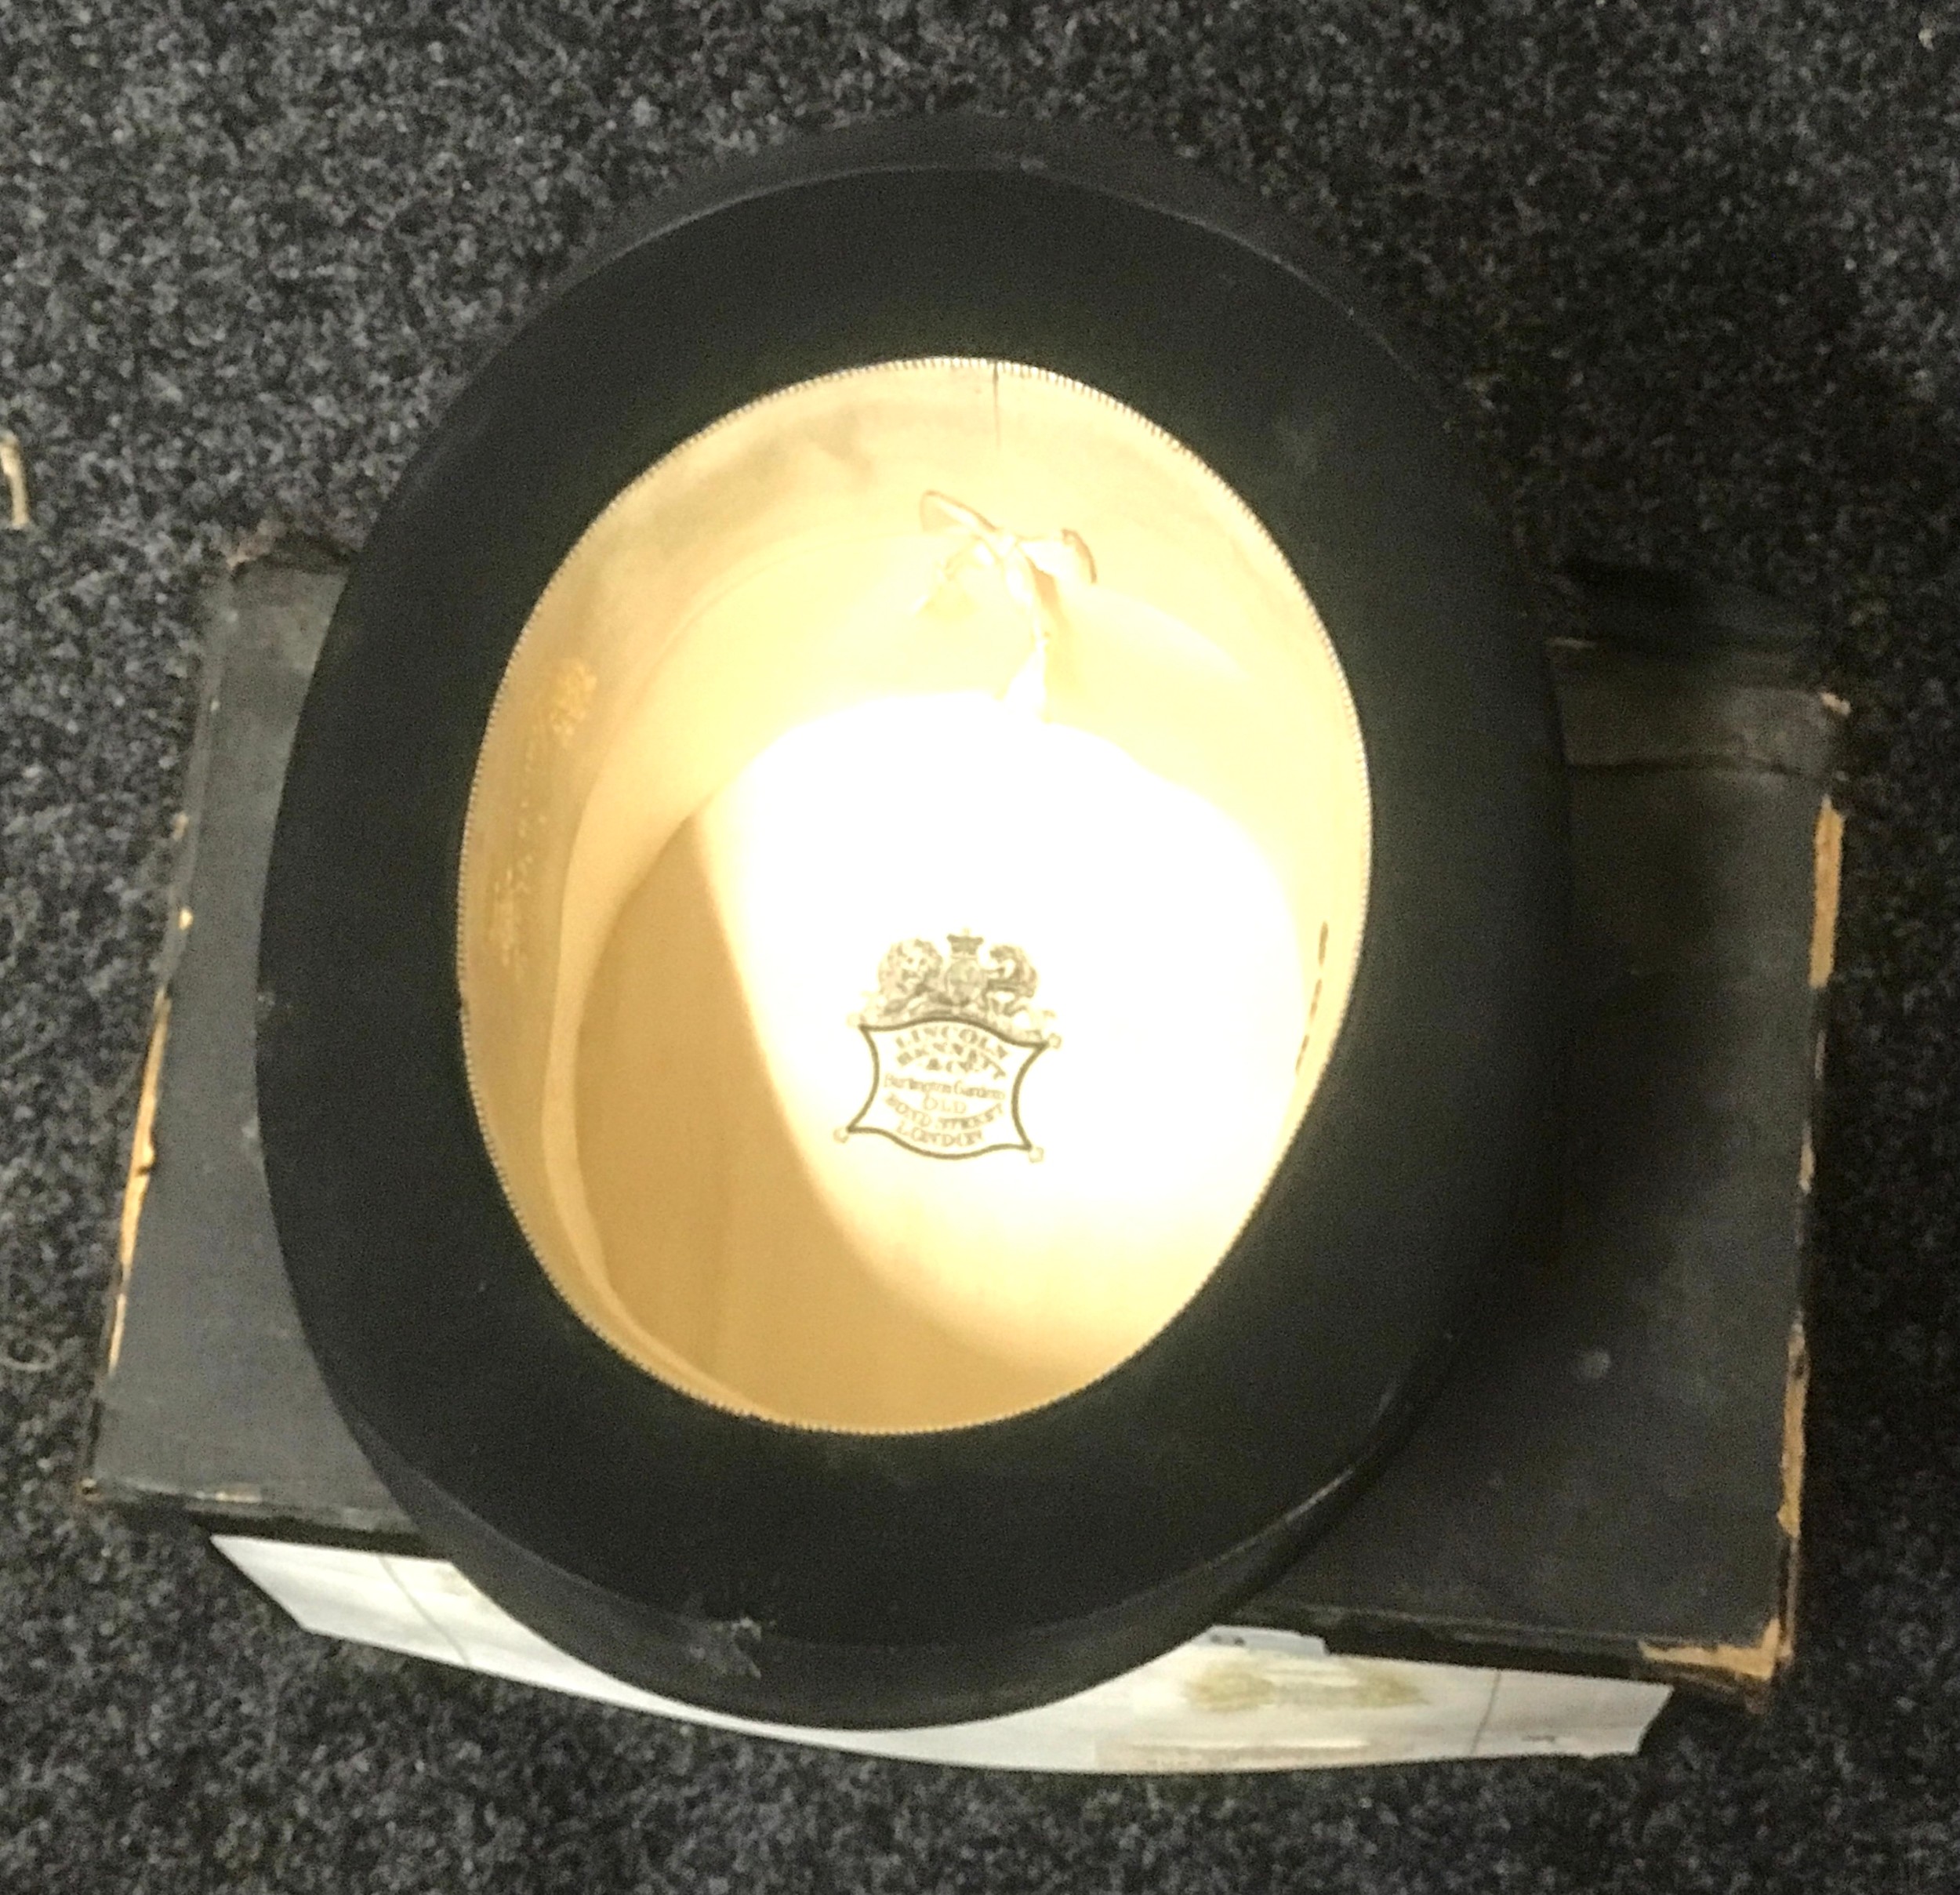 Vintage boxed Lincoln Bennet and co top hat - Image 2 of 3